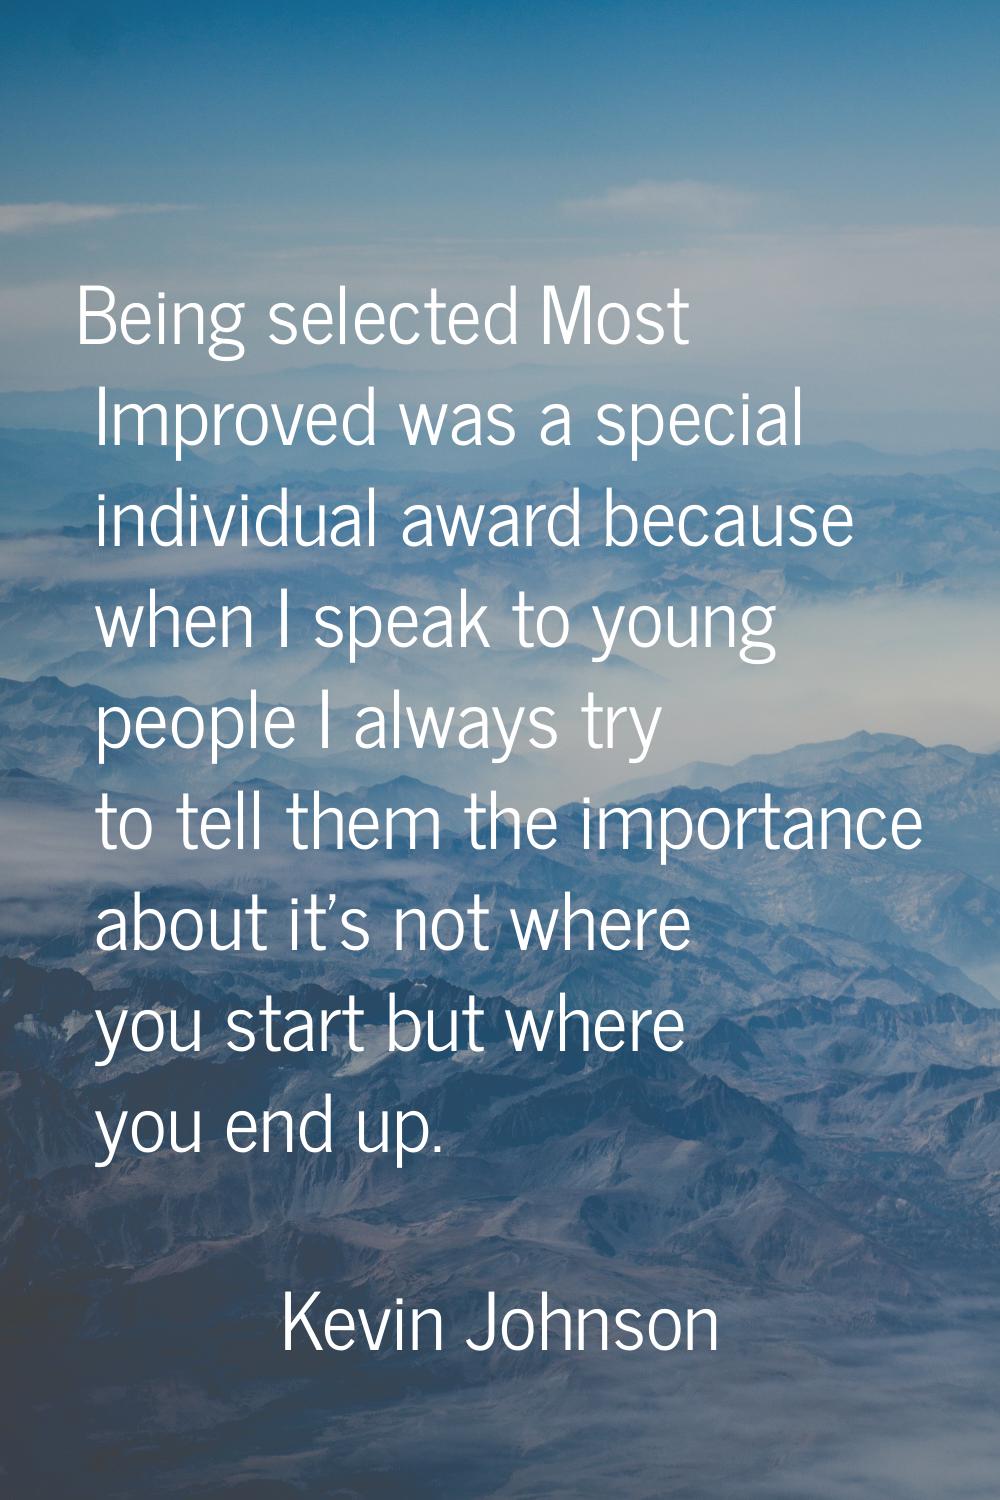 Being selected Most Improved was a special individual award because when I speak to young people I 